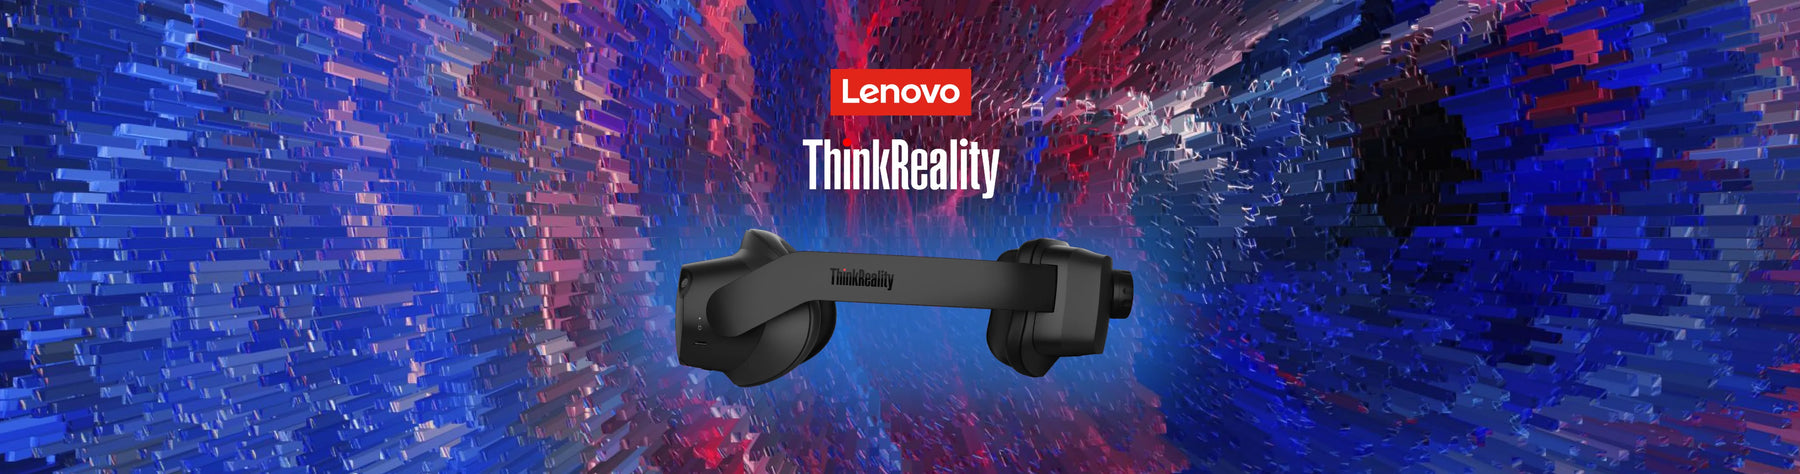 Lenovo Announces the Worldwide Release of ThinkReality VRX: A Leap into Next-Generation VR